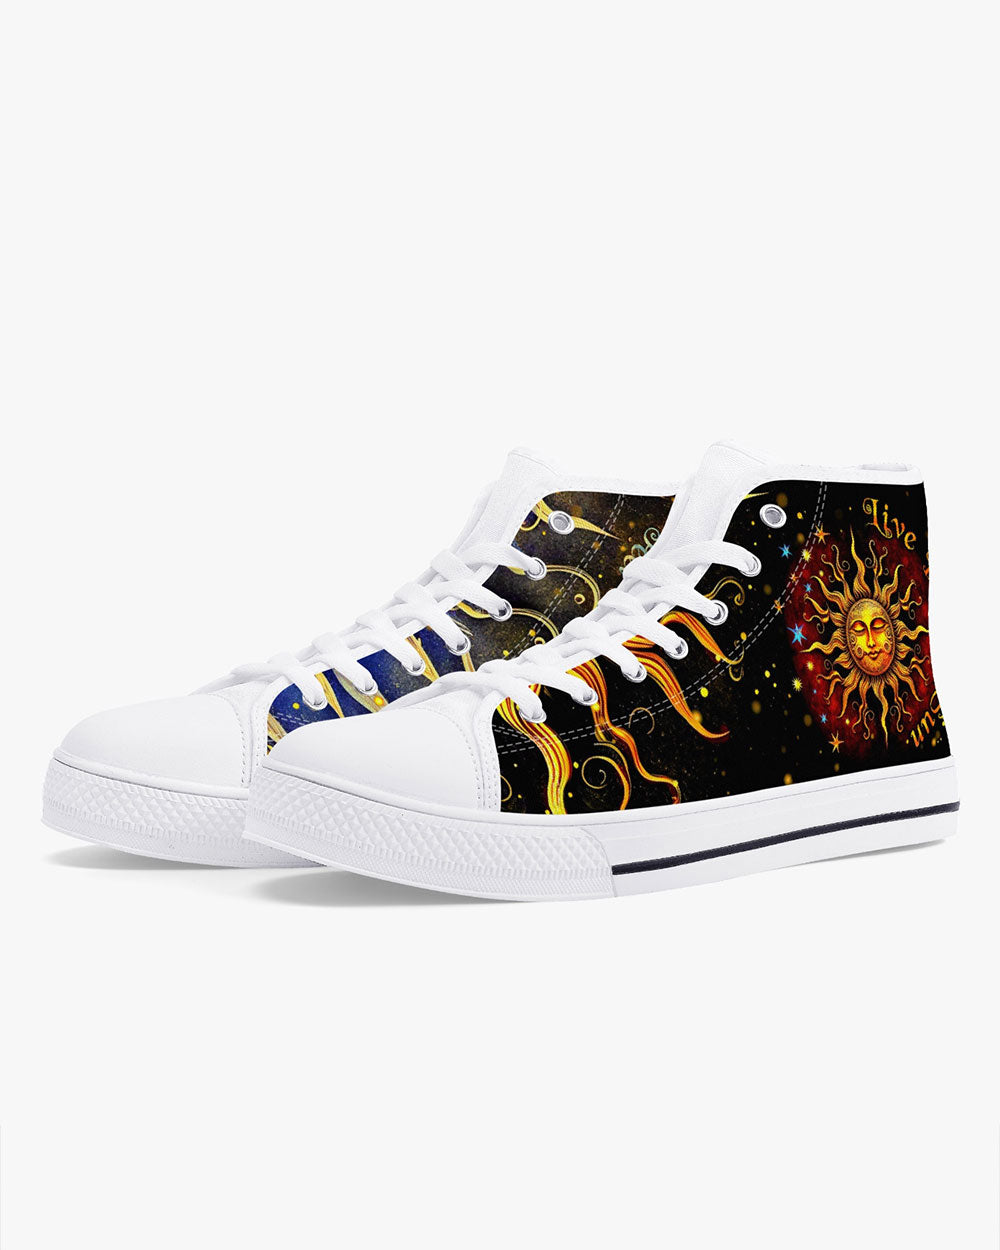 LIVE BY THE SUN HIGH TOP CANVAS SHOES - TYTM2303231